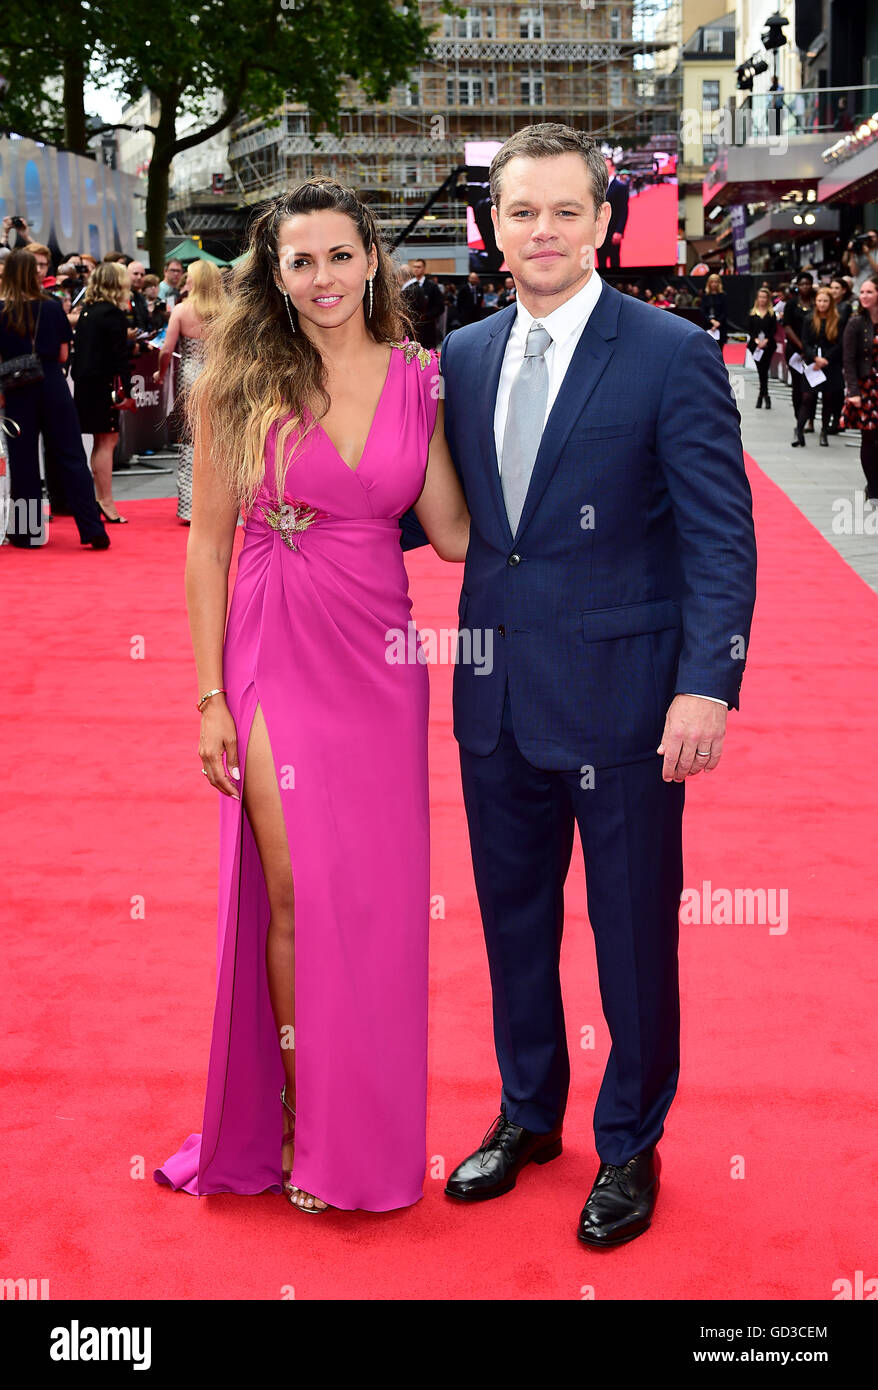 Matt Damon and wife Luciana Barroso attending the European premiere of Jason Bourne held at Odeon Cinema in Leicester Square, London. Stock Photo